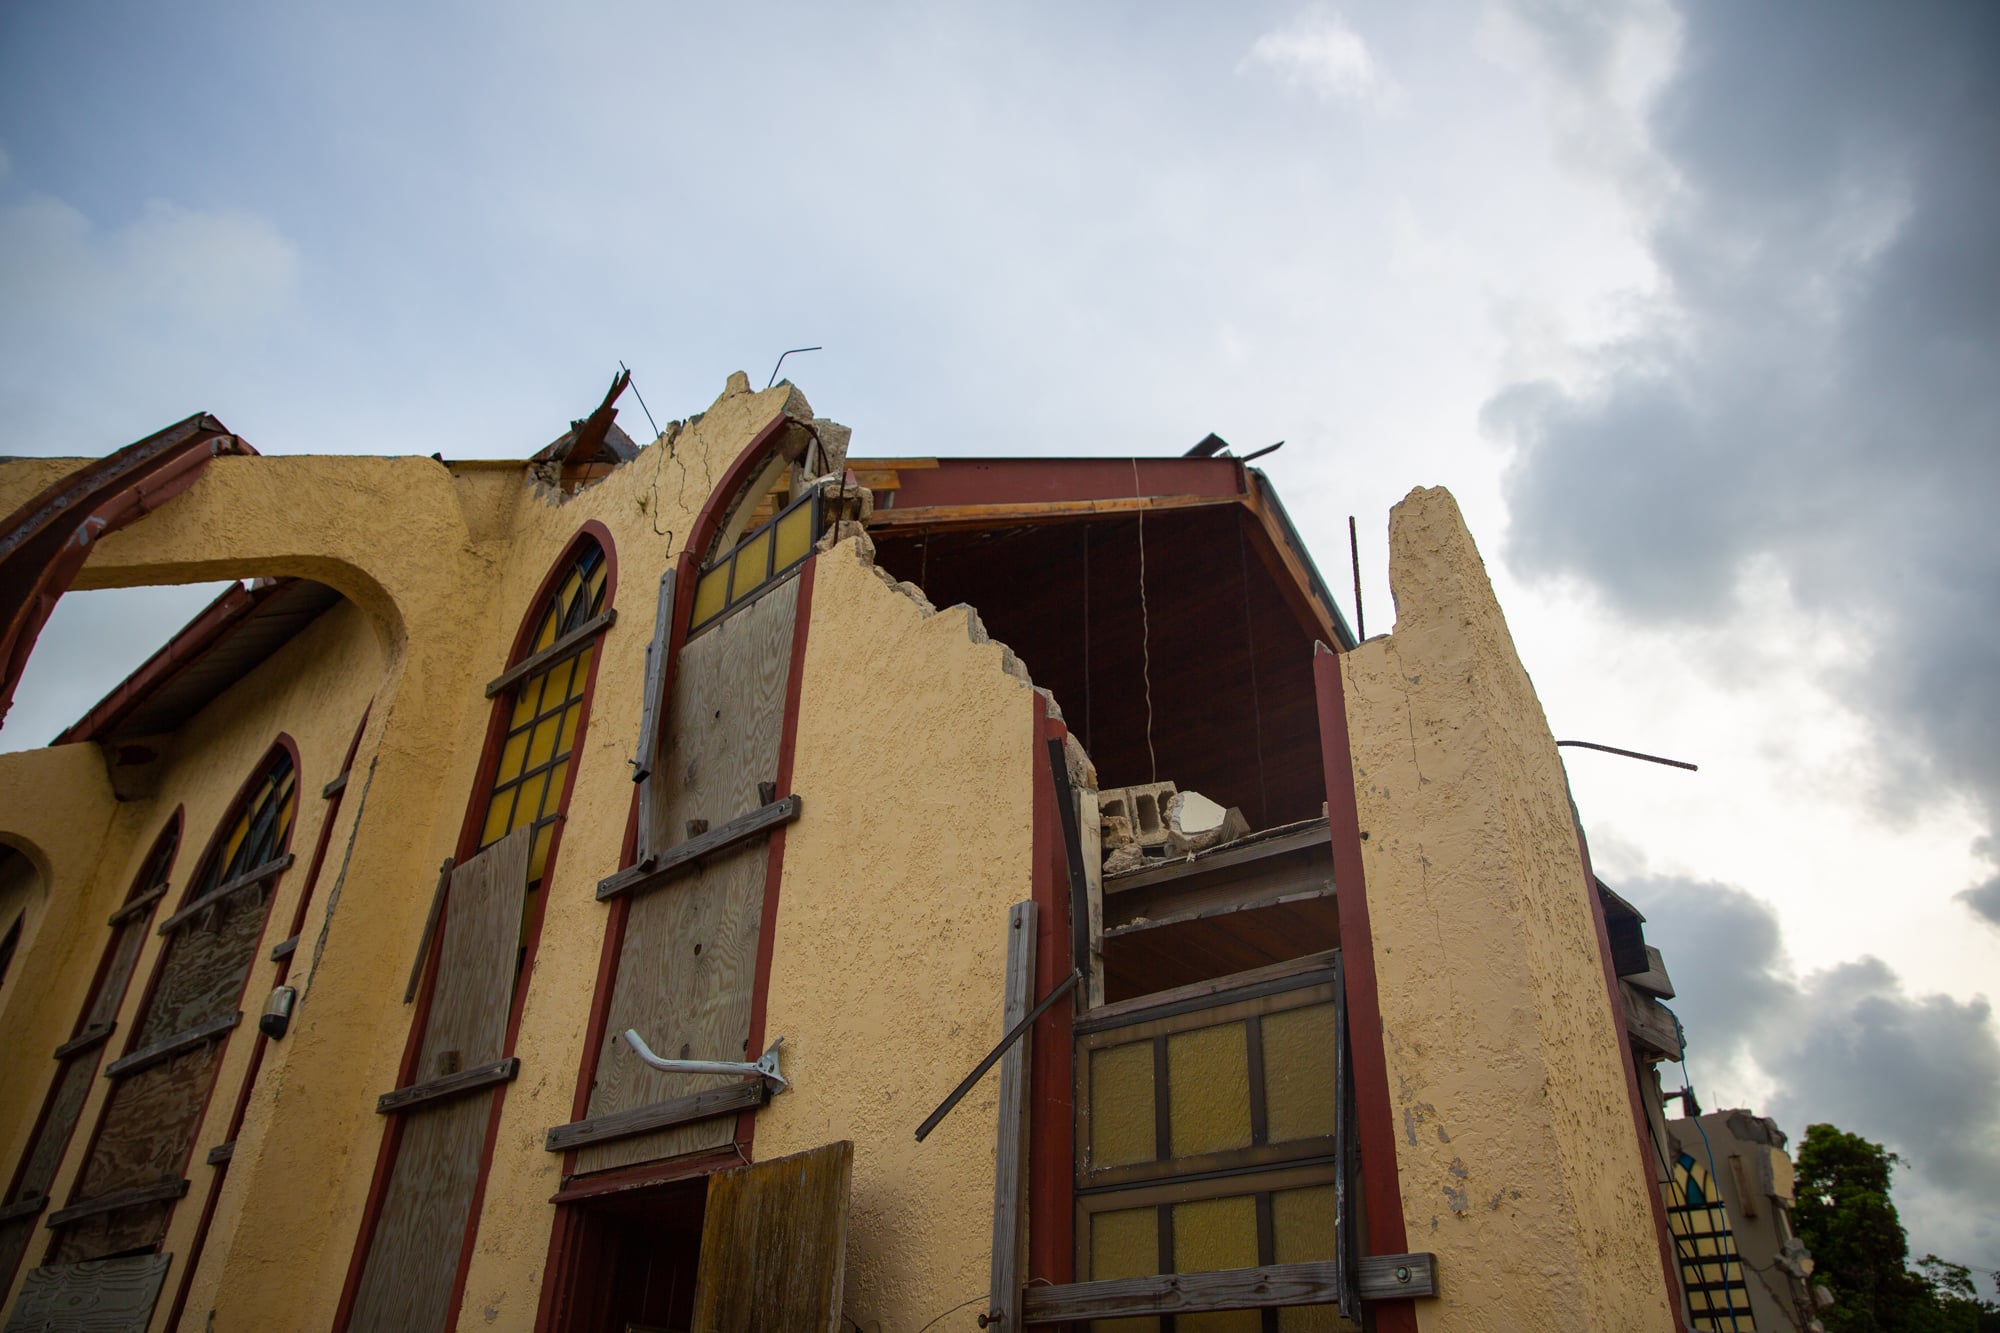 Hurricanes Irma and Maria ripped open the front of the Philadelphia Seventh-Day Adventist Church on St. Thomas, U.S. Virgin Islands. Worshippers gather  in the basement as they wait to rebuild two years later. (Ariel Salk/News21)